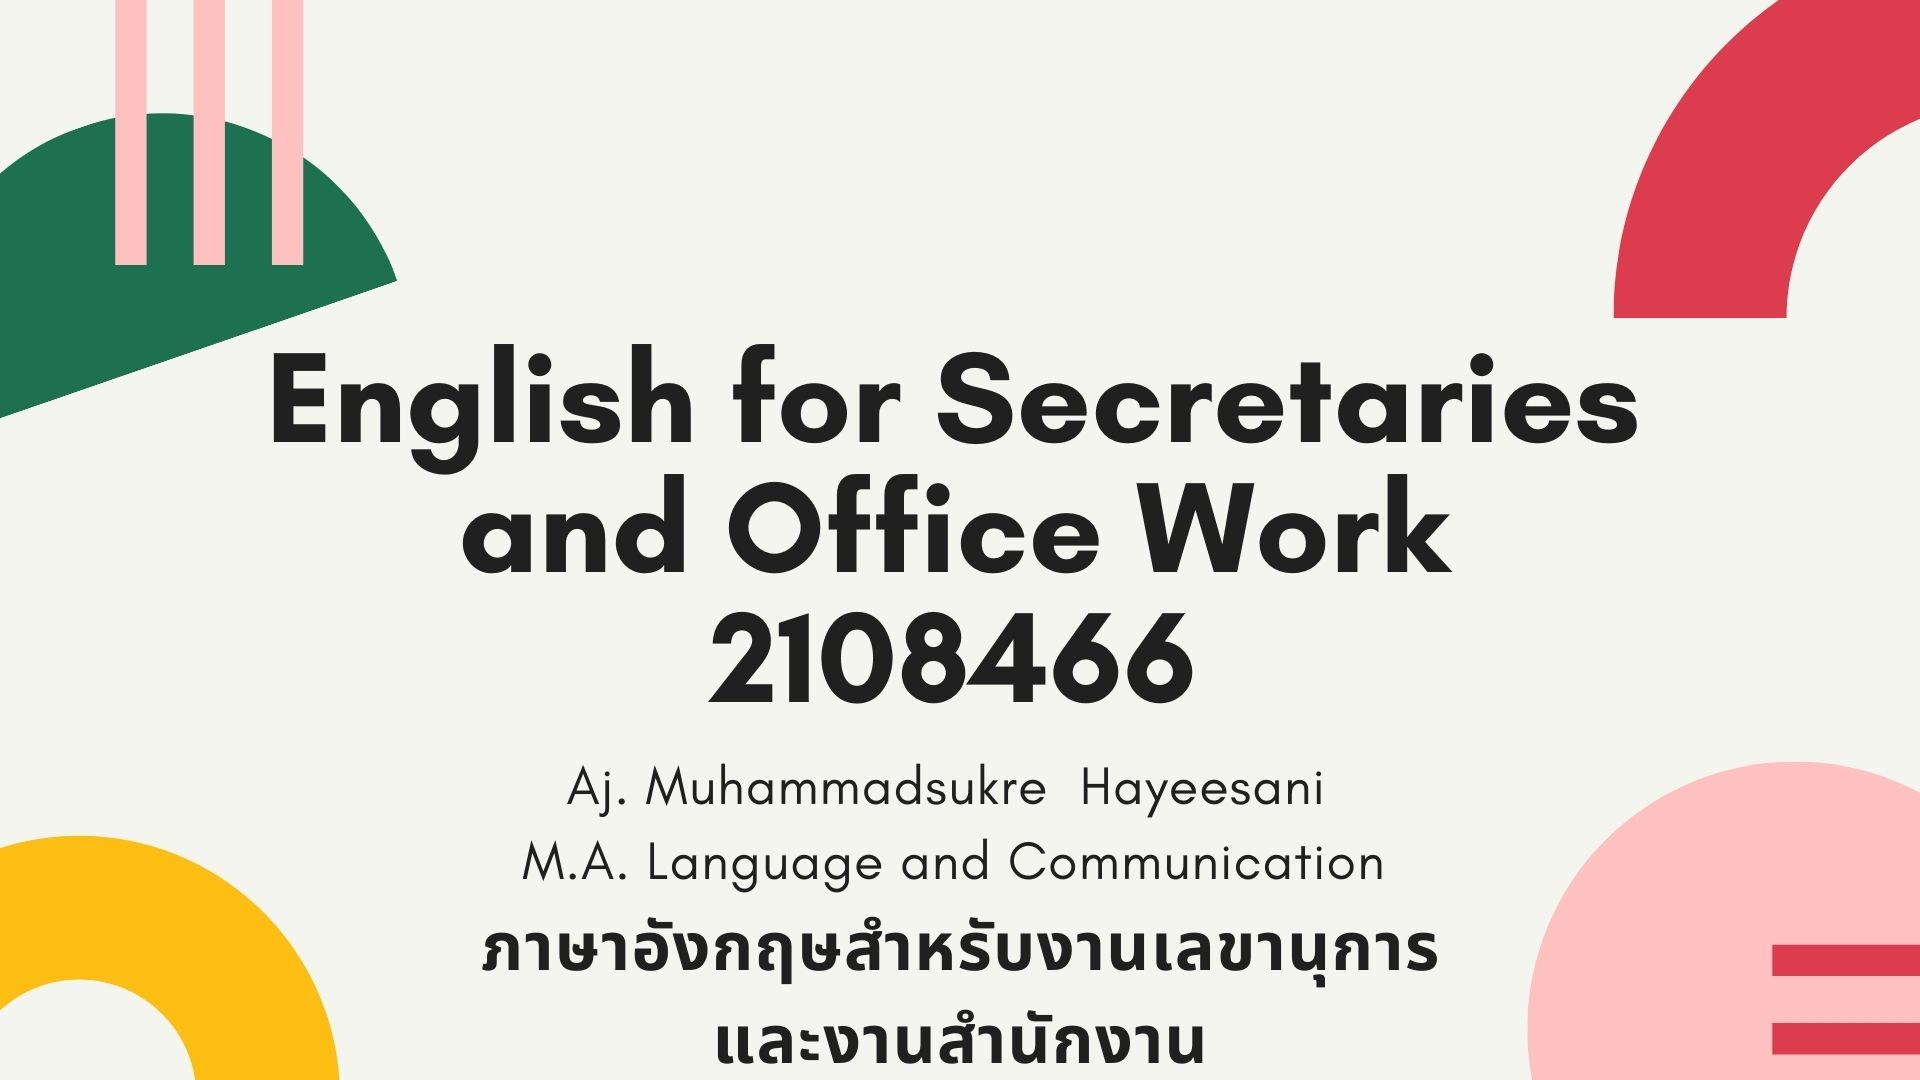 English for Secretaries and Office Works